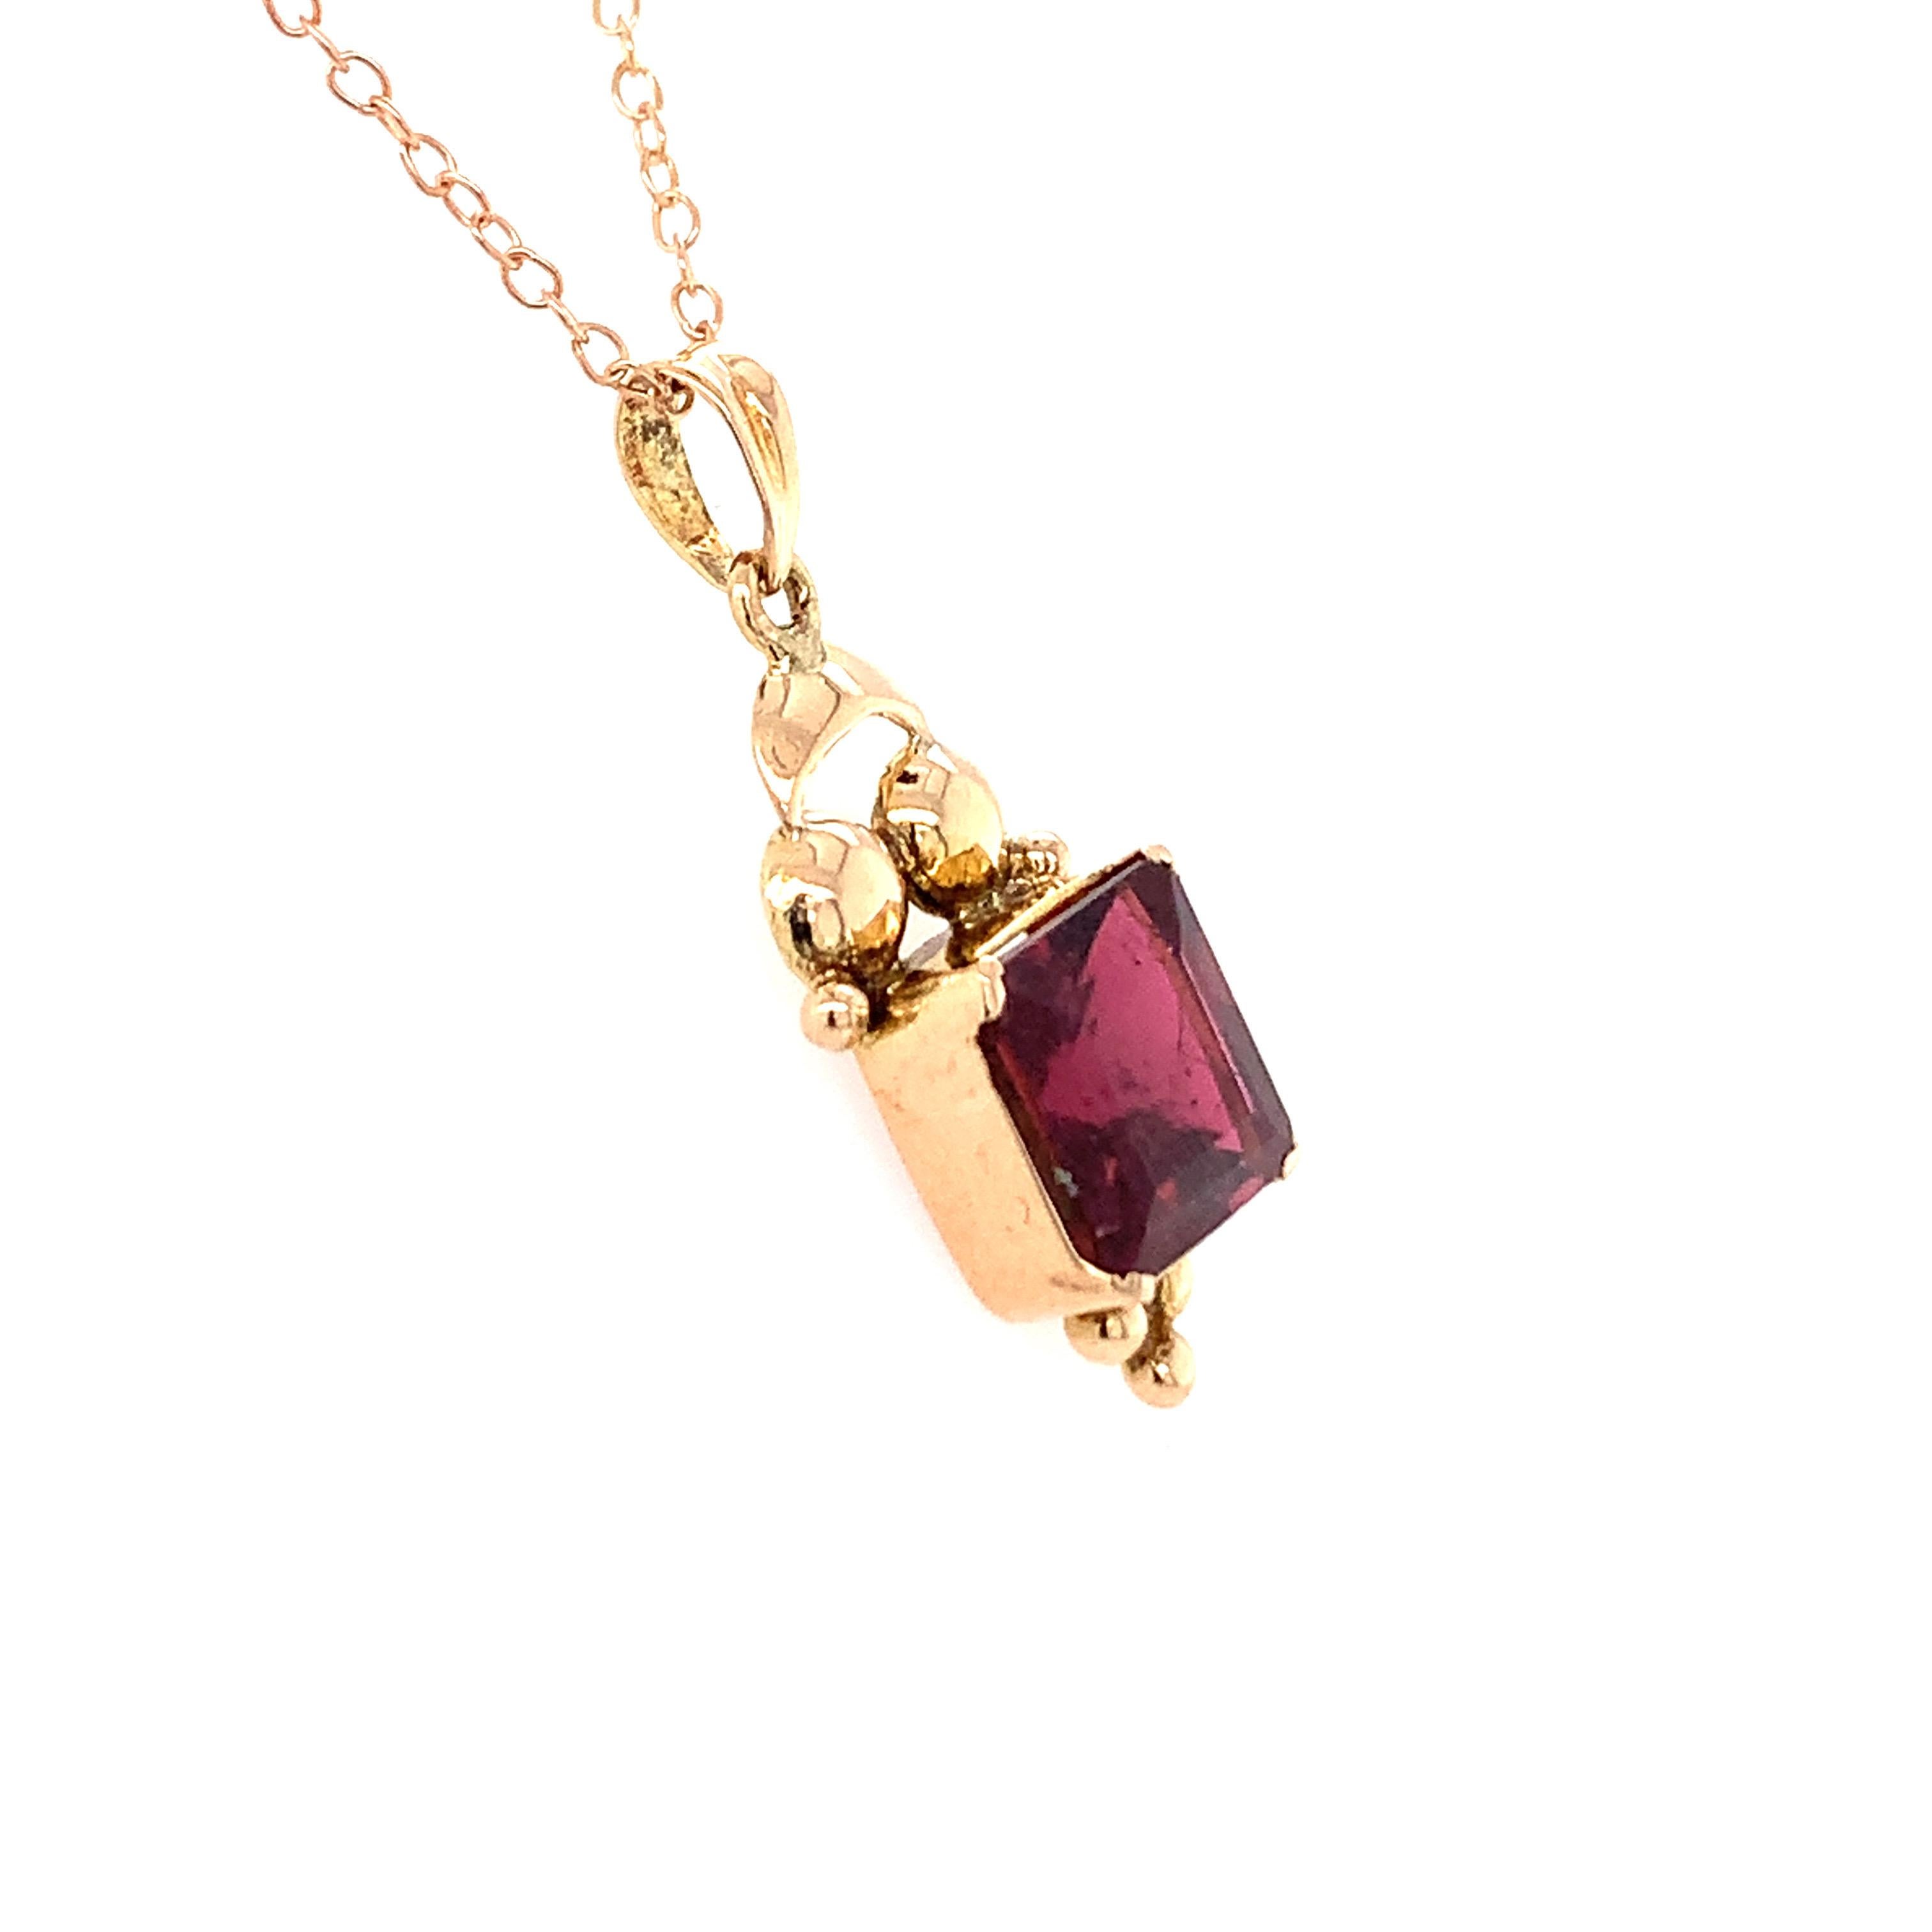 Hand cut and polished natural garnet is crafted with hand in 14K yellow gold. 
Ideal for daily casual wear.
Chain is not included. 
Image is enlarged to get a closer view.
Ethically sourced natural gem stone.